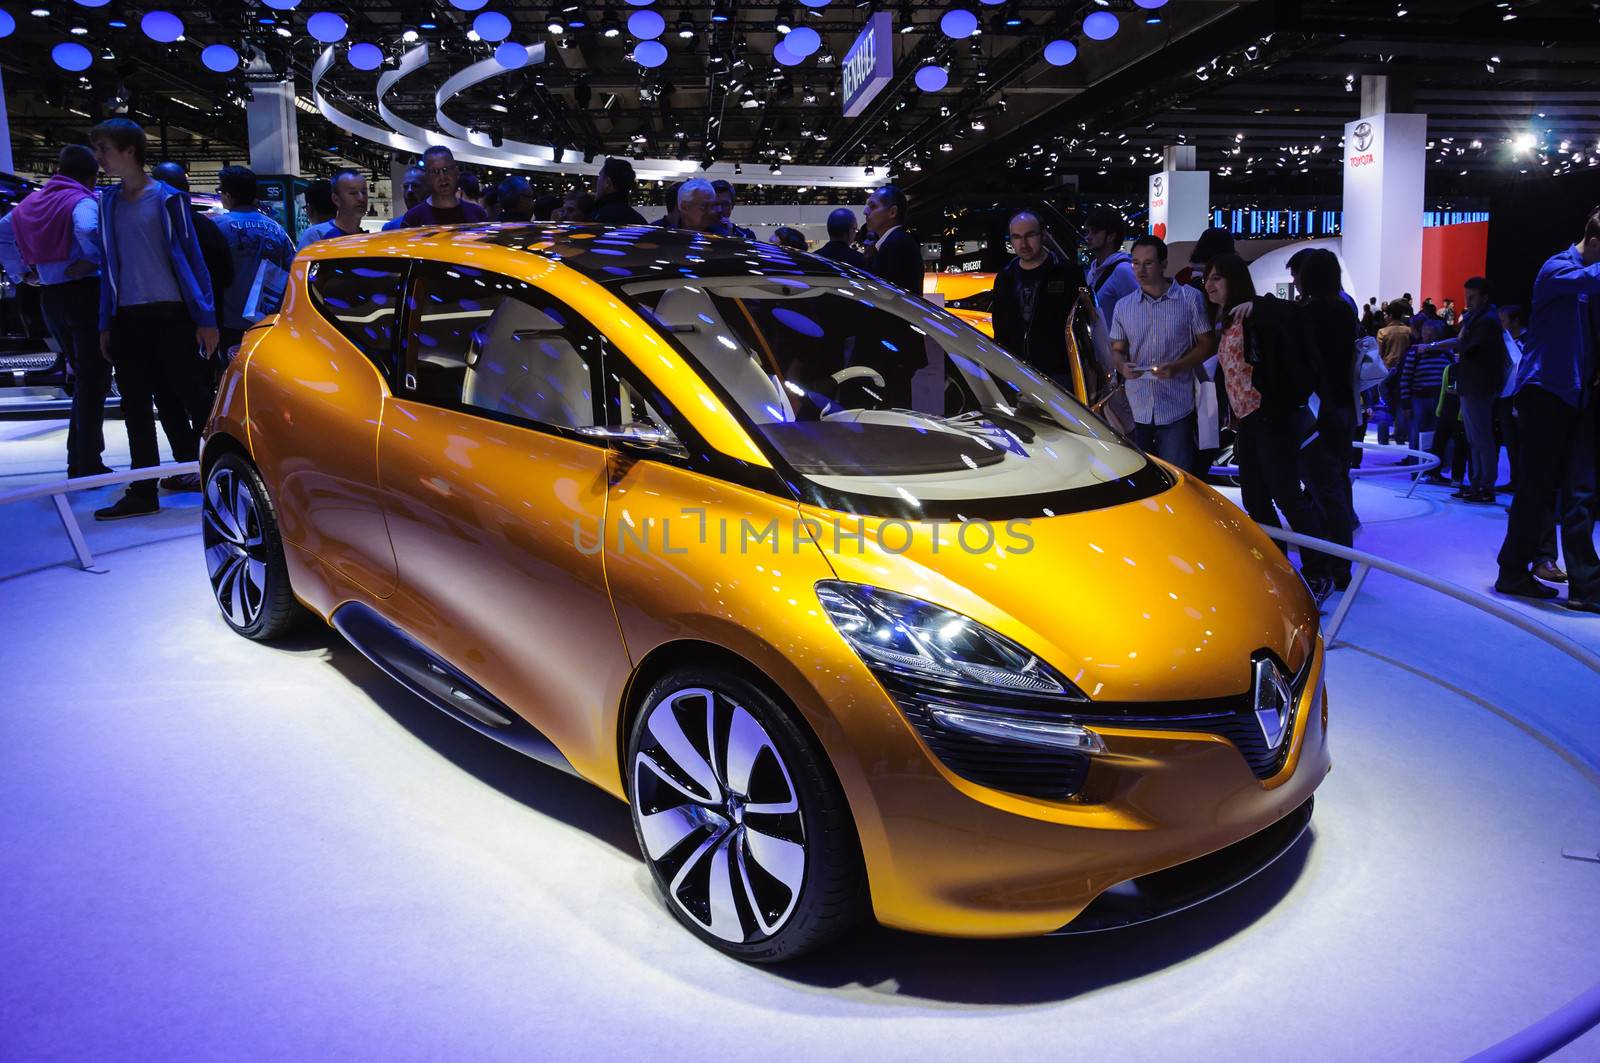 FRANKFURT - SEPT 21: RENAULT R-SPACE CONCEPT presented as world premiere at the 65th IAA (Internationale Automobil Ausstellung) on September 21, 2013 in Frankfurt, Germany